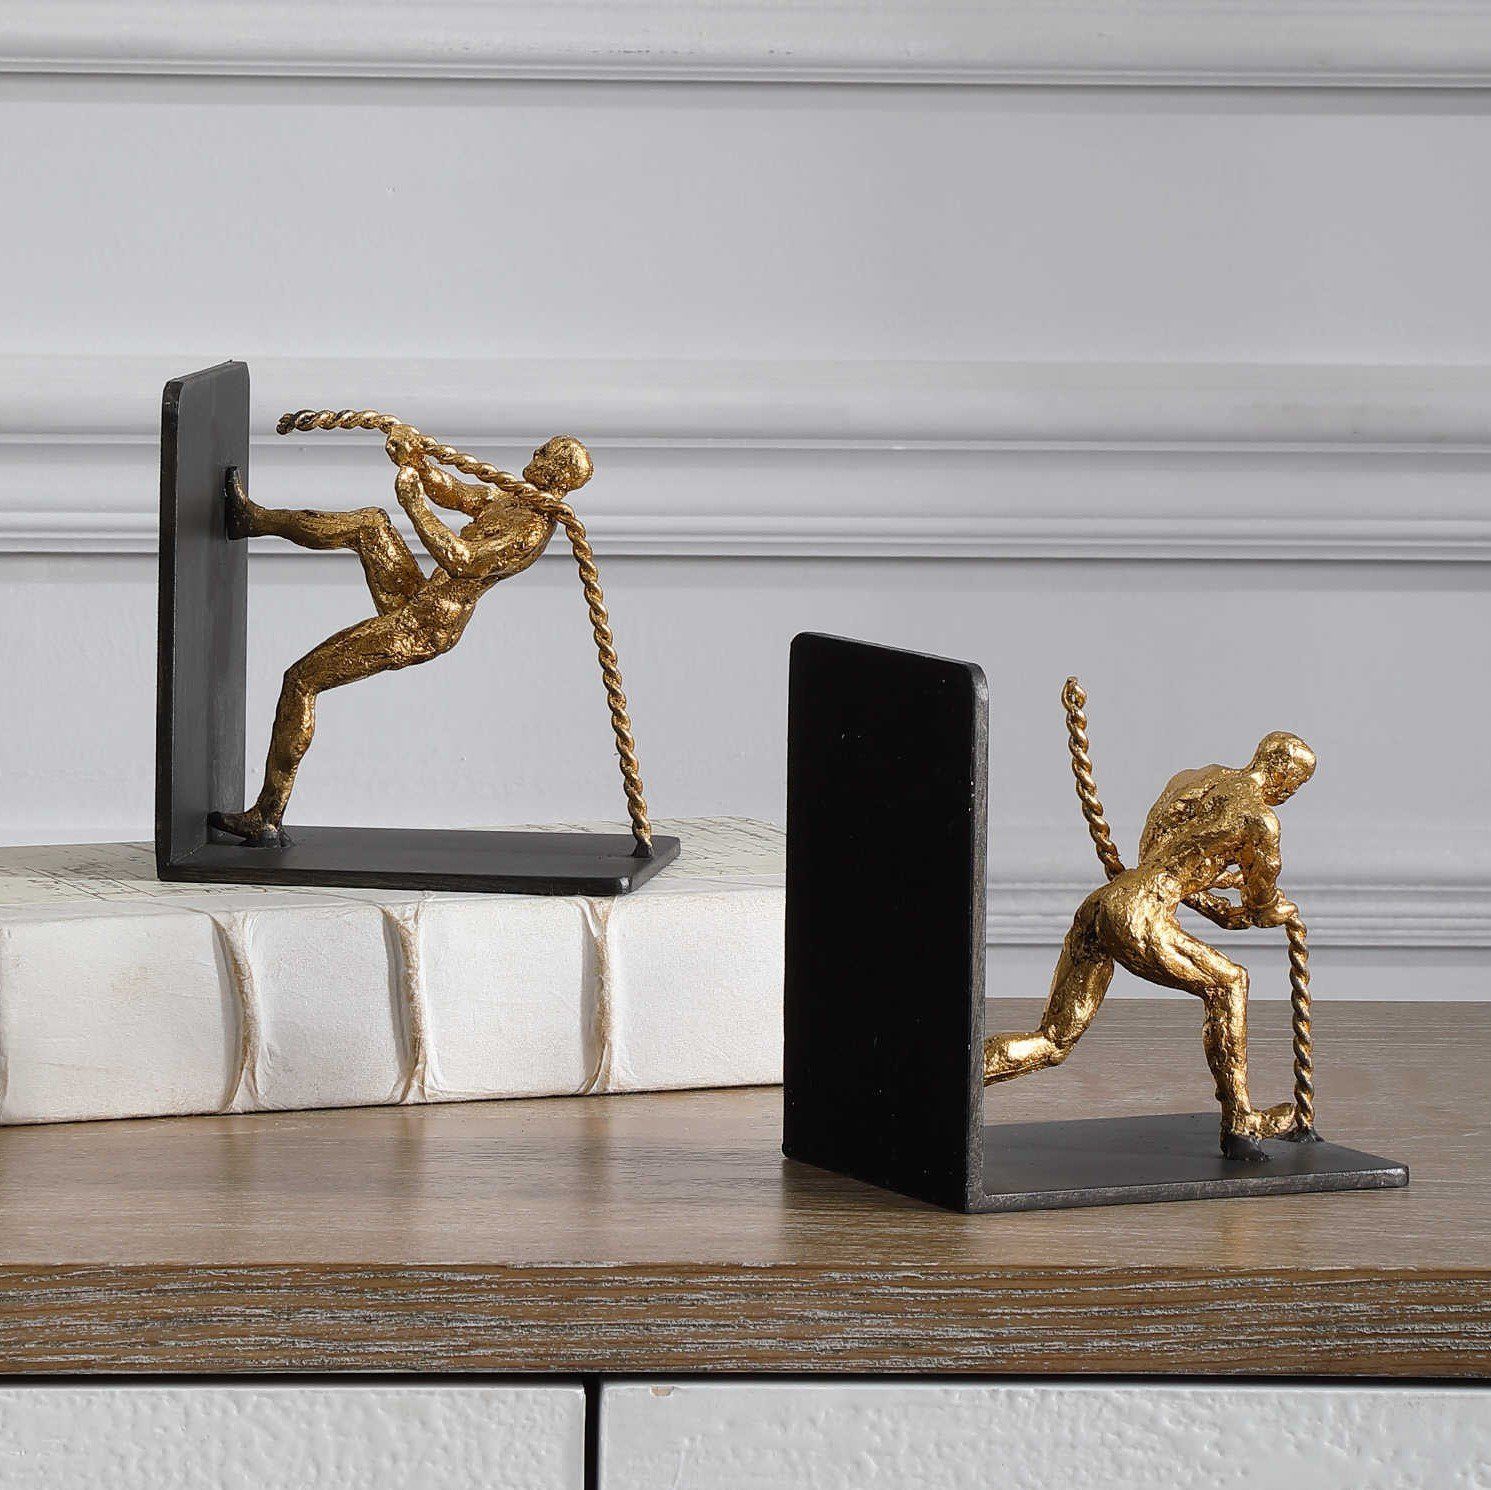 Antique human figurine bookends plated in gold are charming and unique